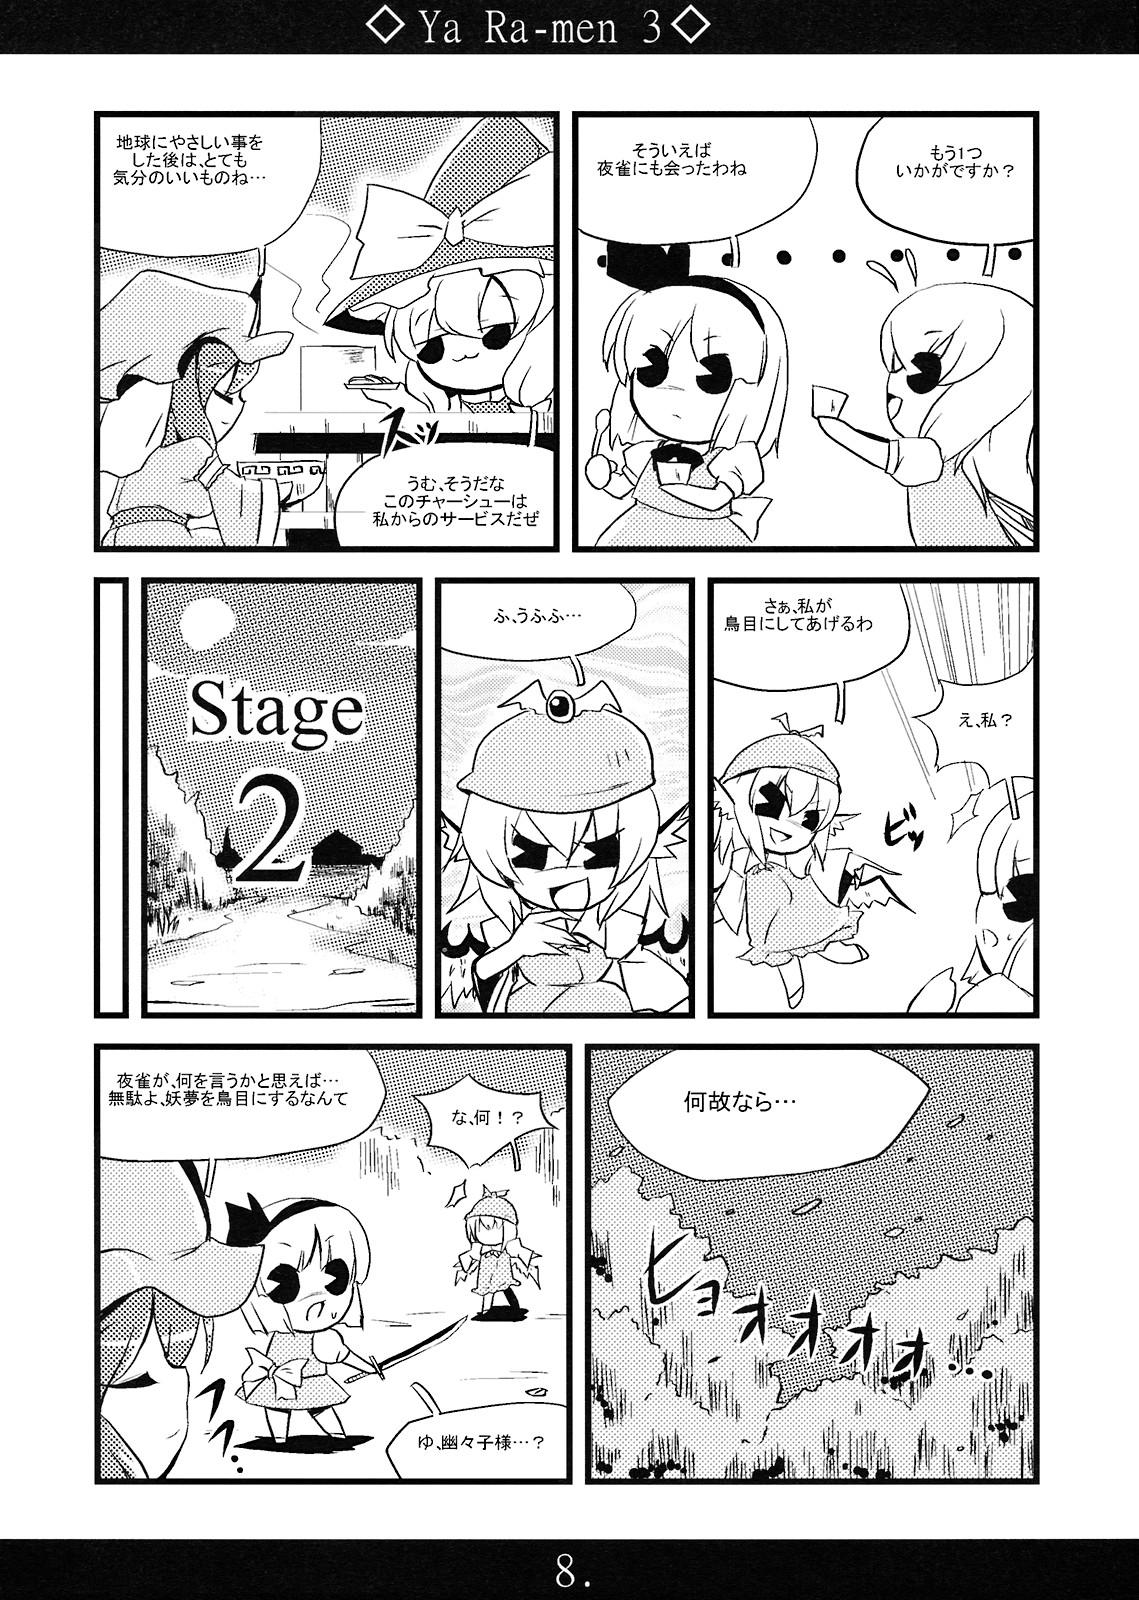 Cumload Yaa Ramen 3 - Touhou project Longhair - Page 7